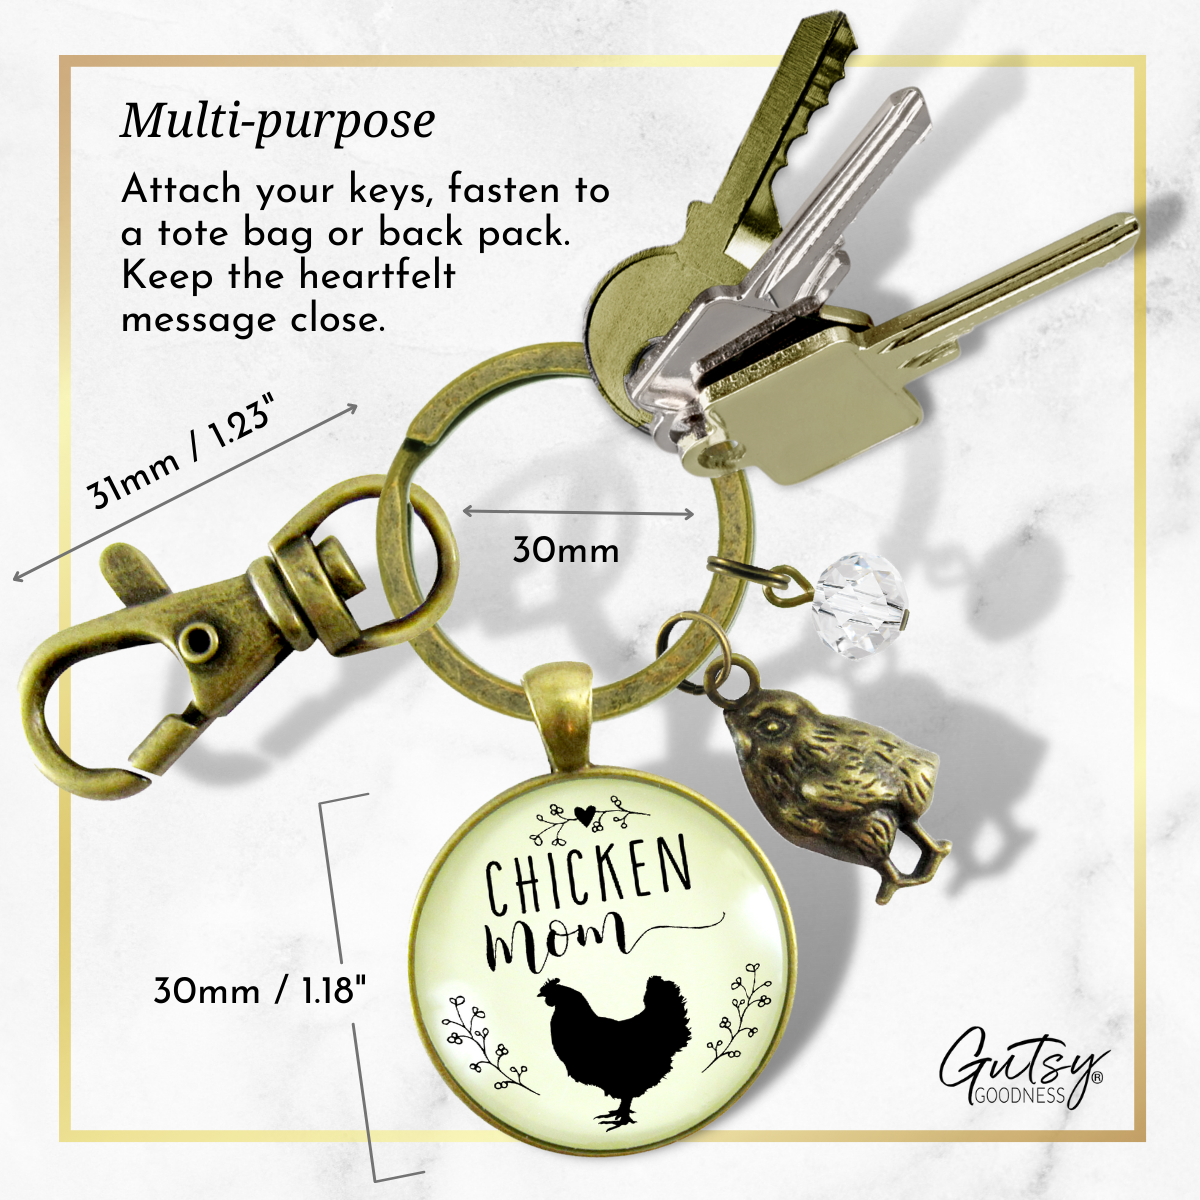 Chicken Mom Keychain Chick Gift For Mother Vintage Farm Life Inspired Baby Charm - Gutsy Goodness Handmade Jewelry;Chicken Mom Keychain Chick Gift For Mother Vintage Farm Life Inspired Baby Charm - Gutsy Goodness Handmade Jewelry Gifts